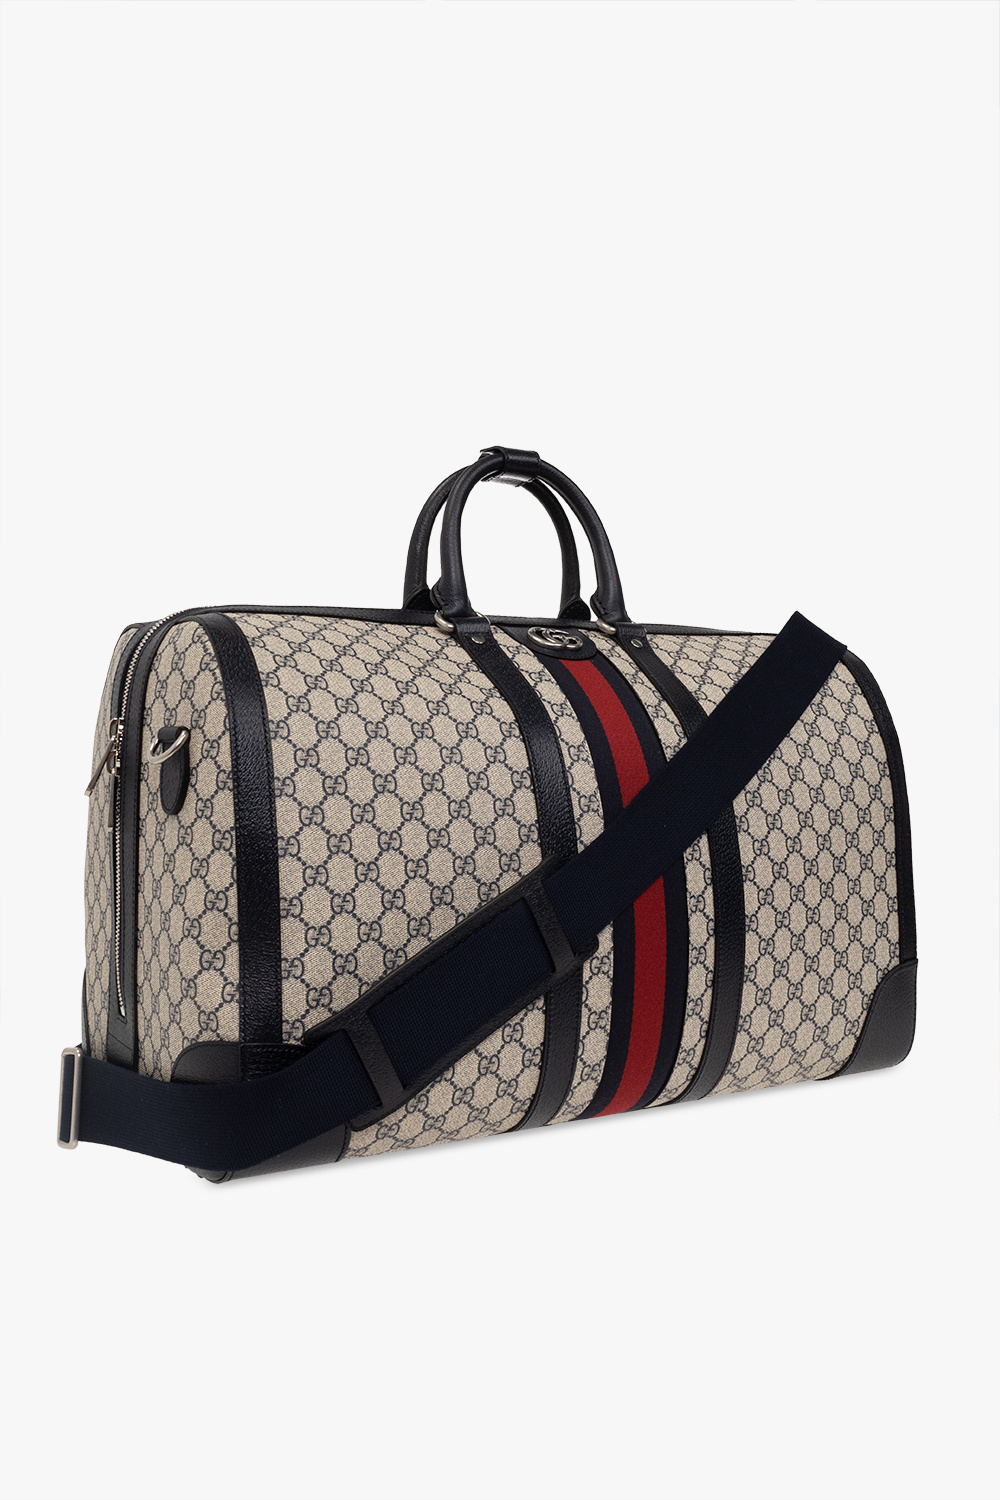 Ophidia large duffle bag in grey and black Supreme